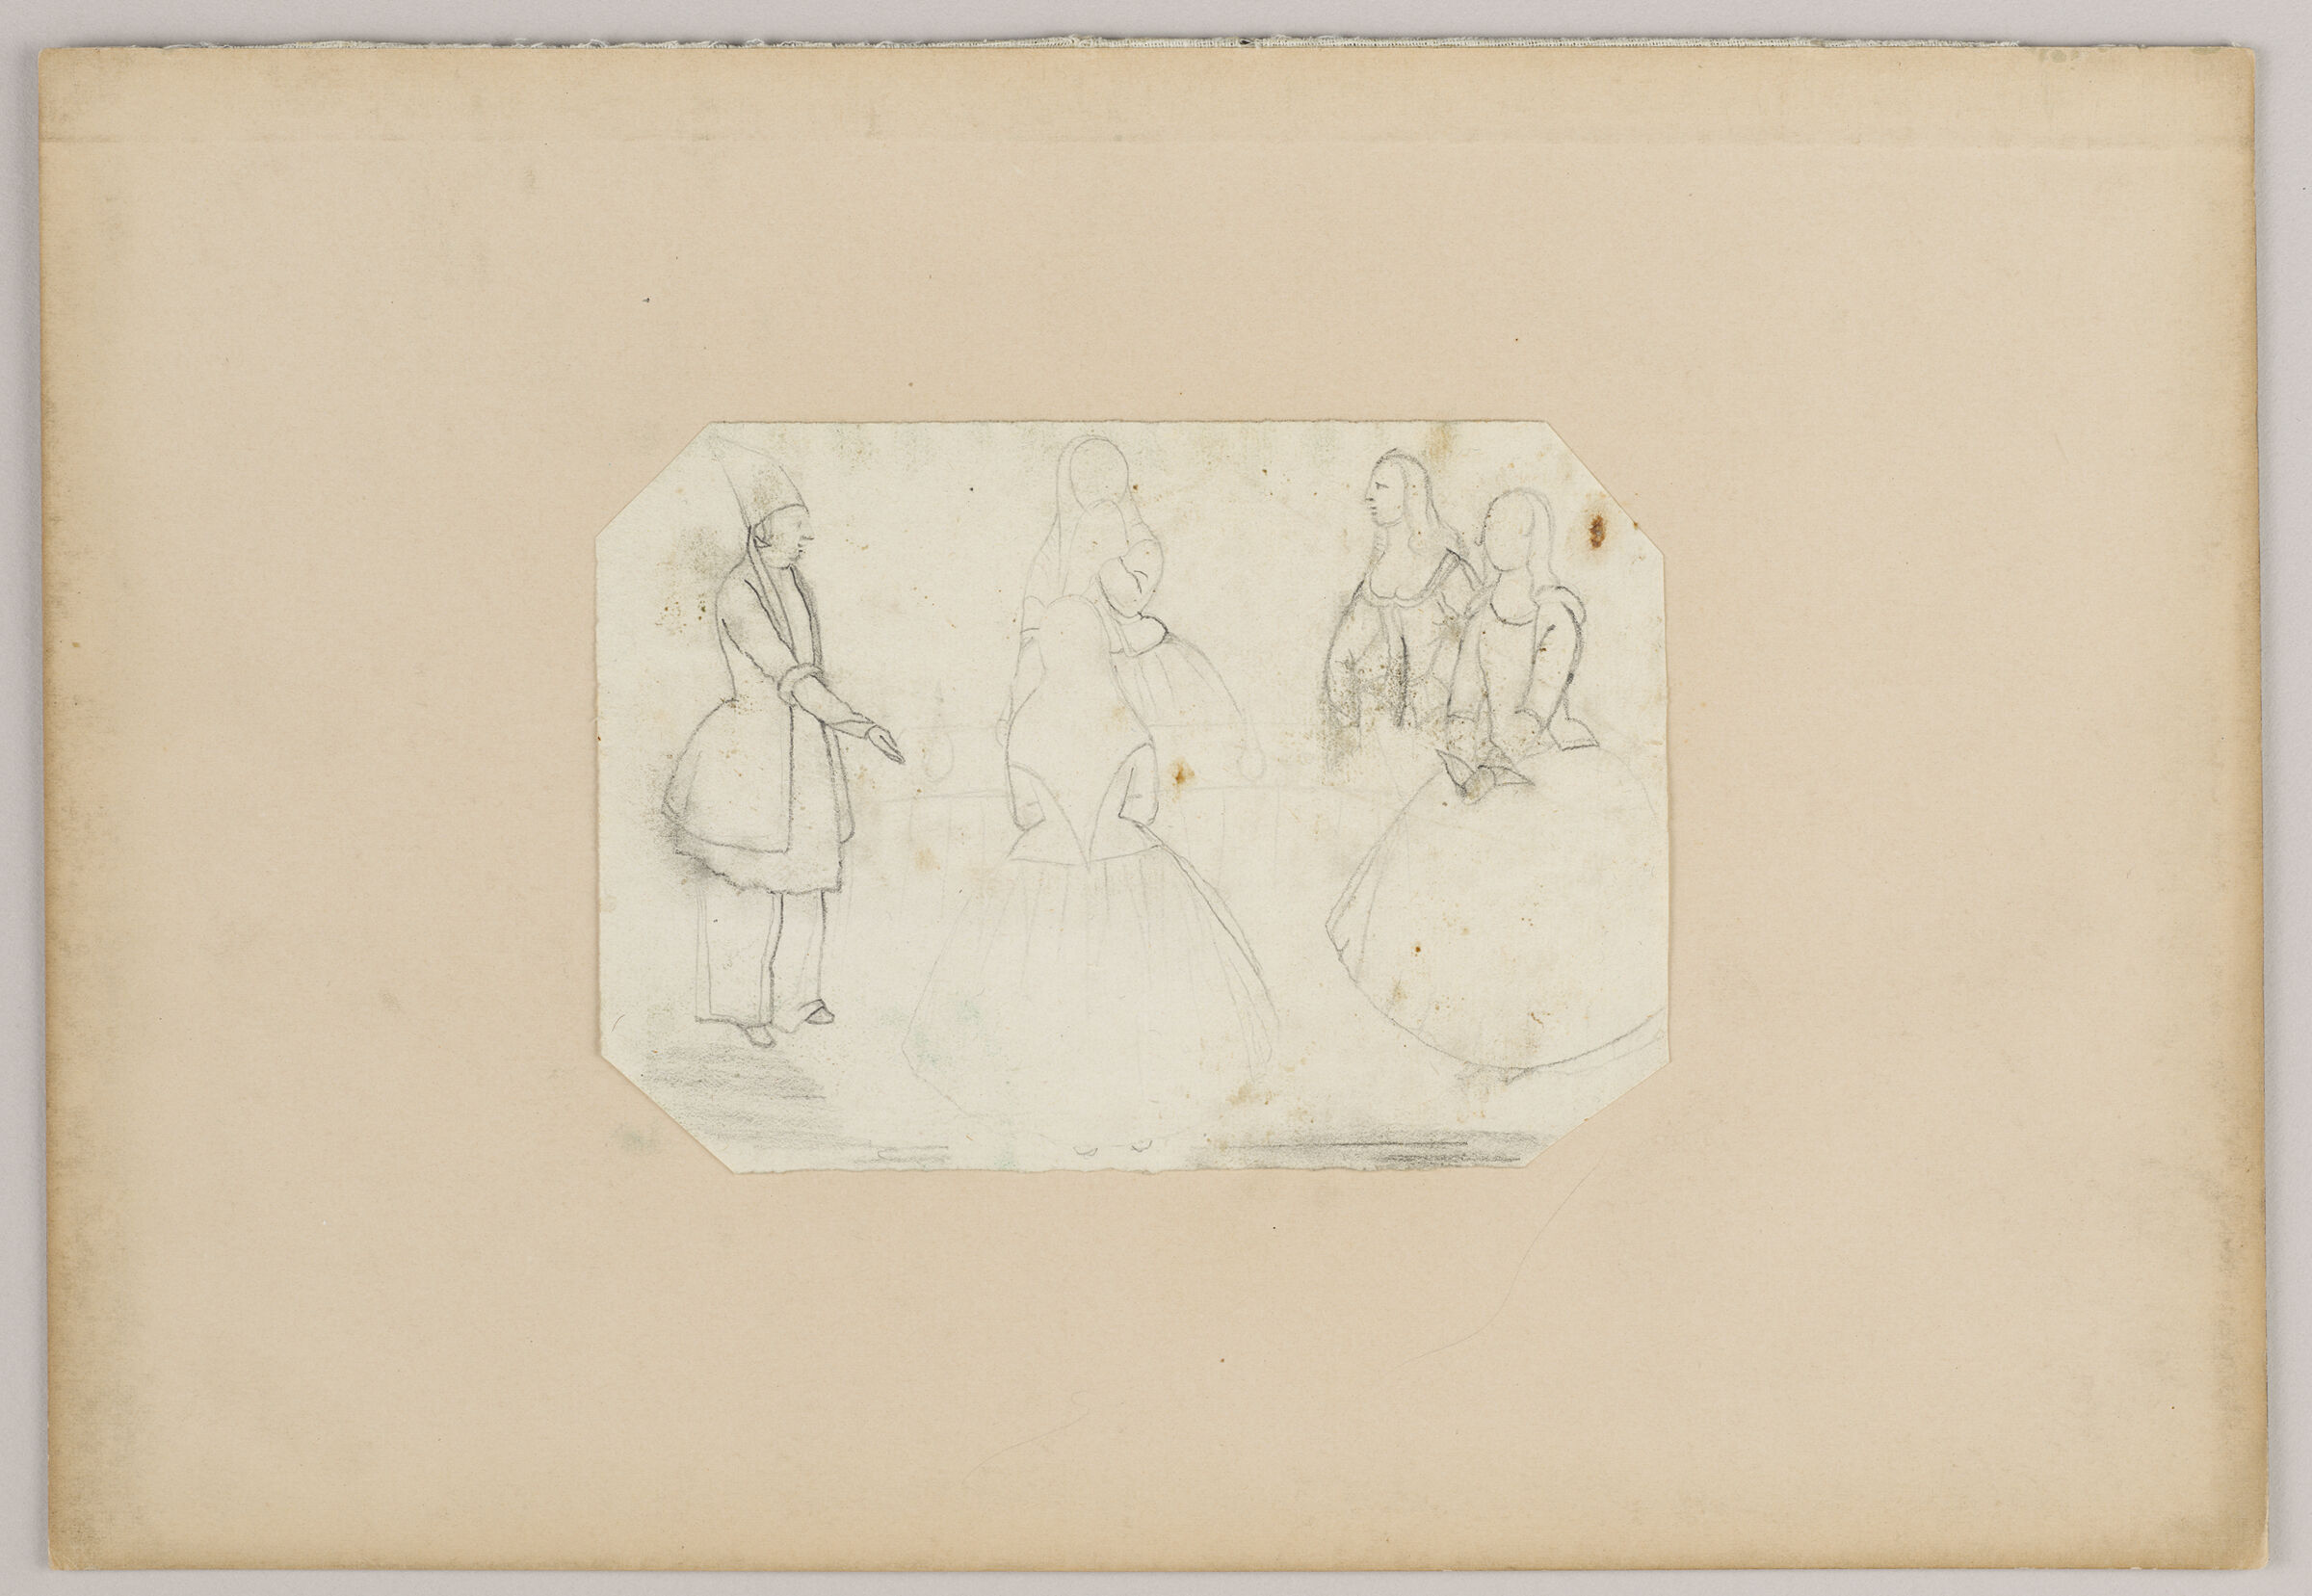 Folio 50 From An Album Of Drawings And Paintings: Sketch Of Qajar Man And Four Women (Recto); Drawing Set Within A Colored Paper Border: Two Women And A Small Child (Verso)